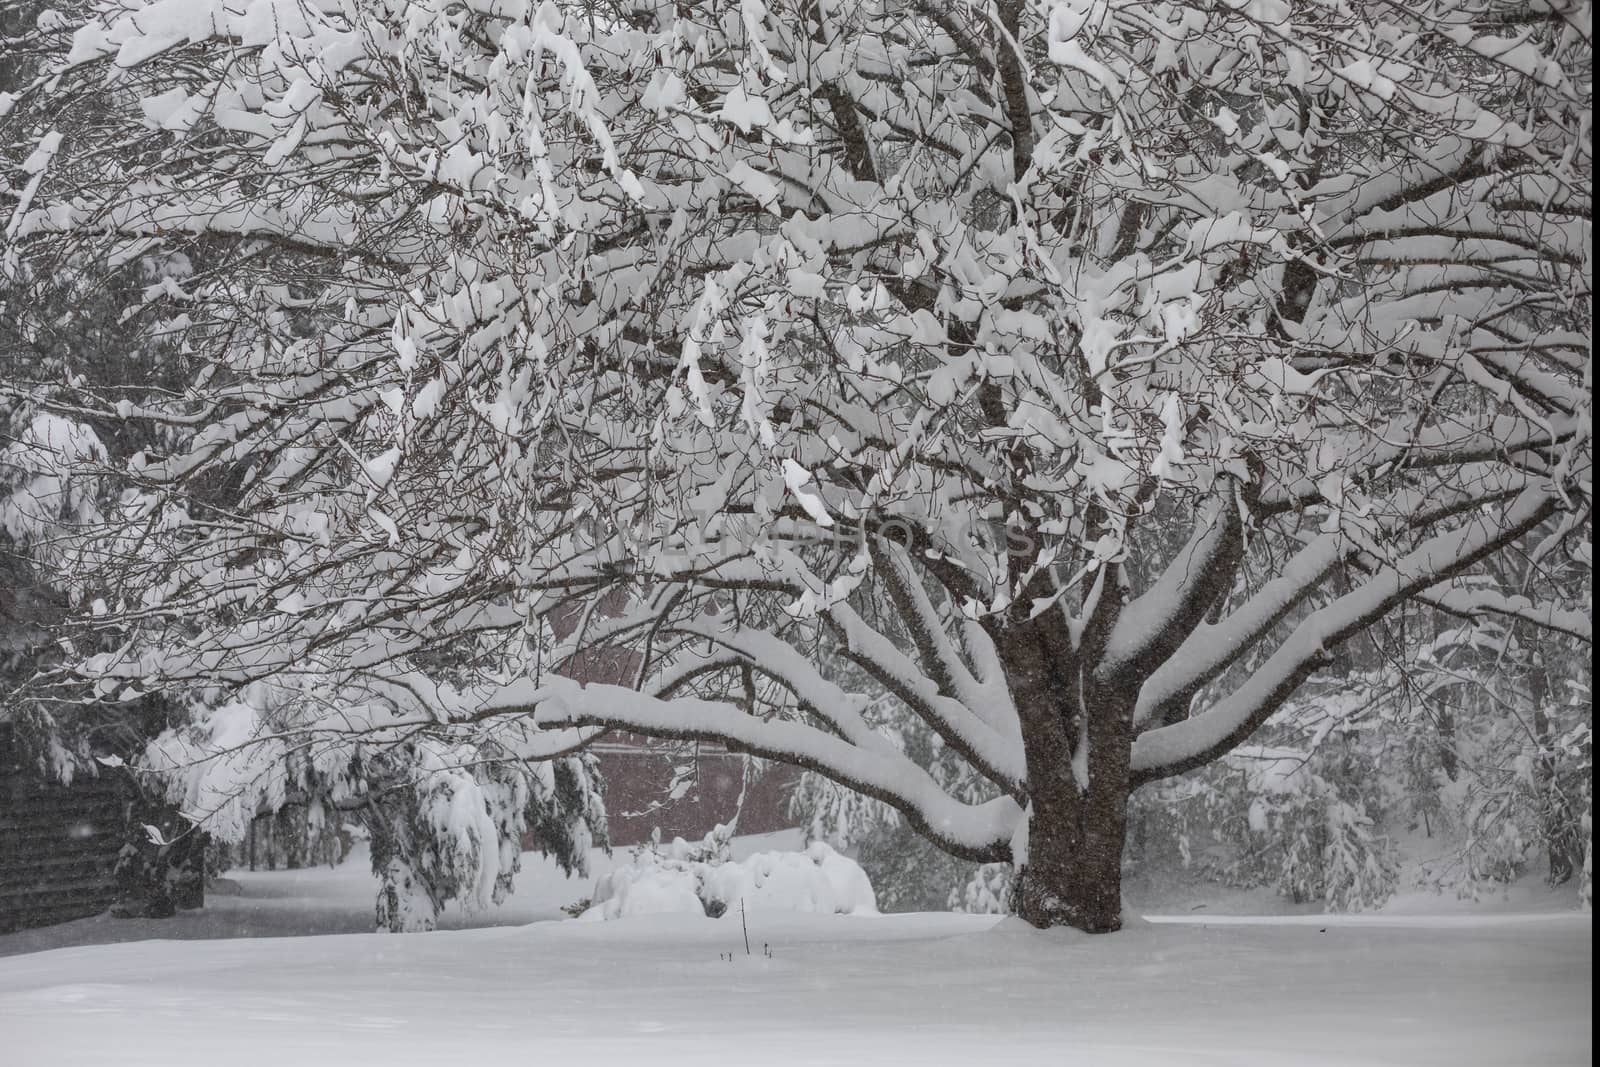 Winter Storm Diego dropped 18 inches of snow on this cherry tree.